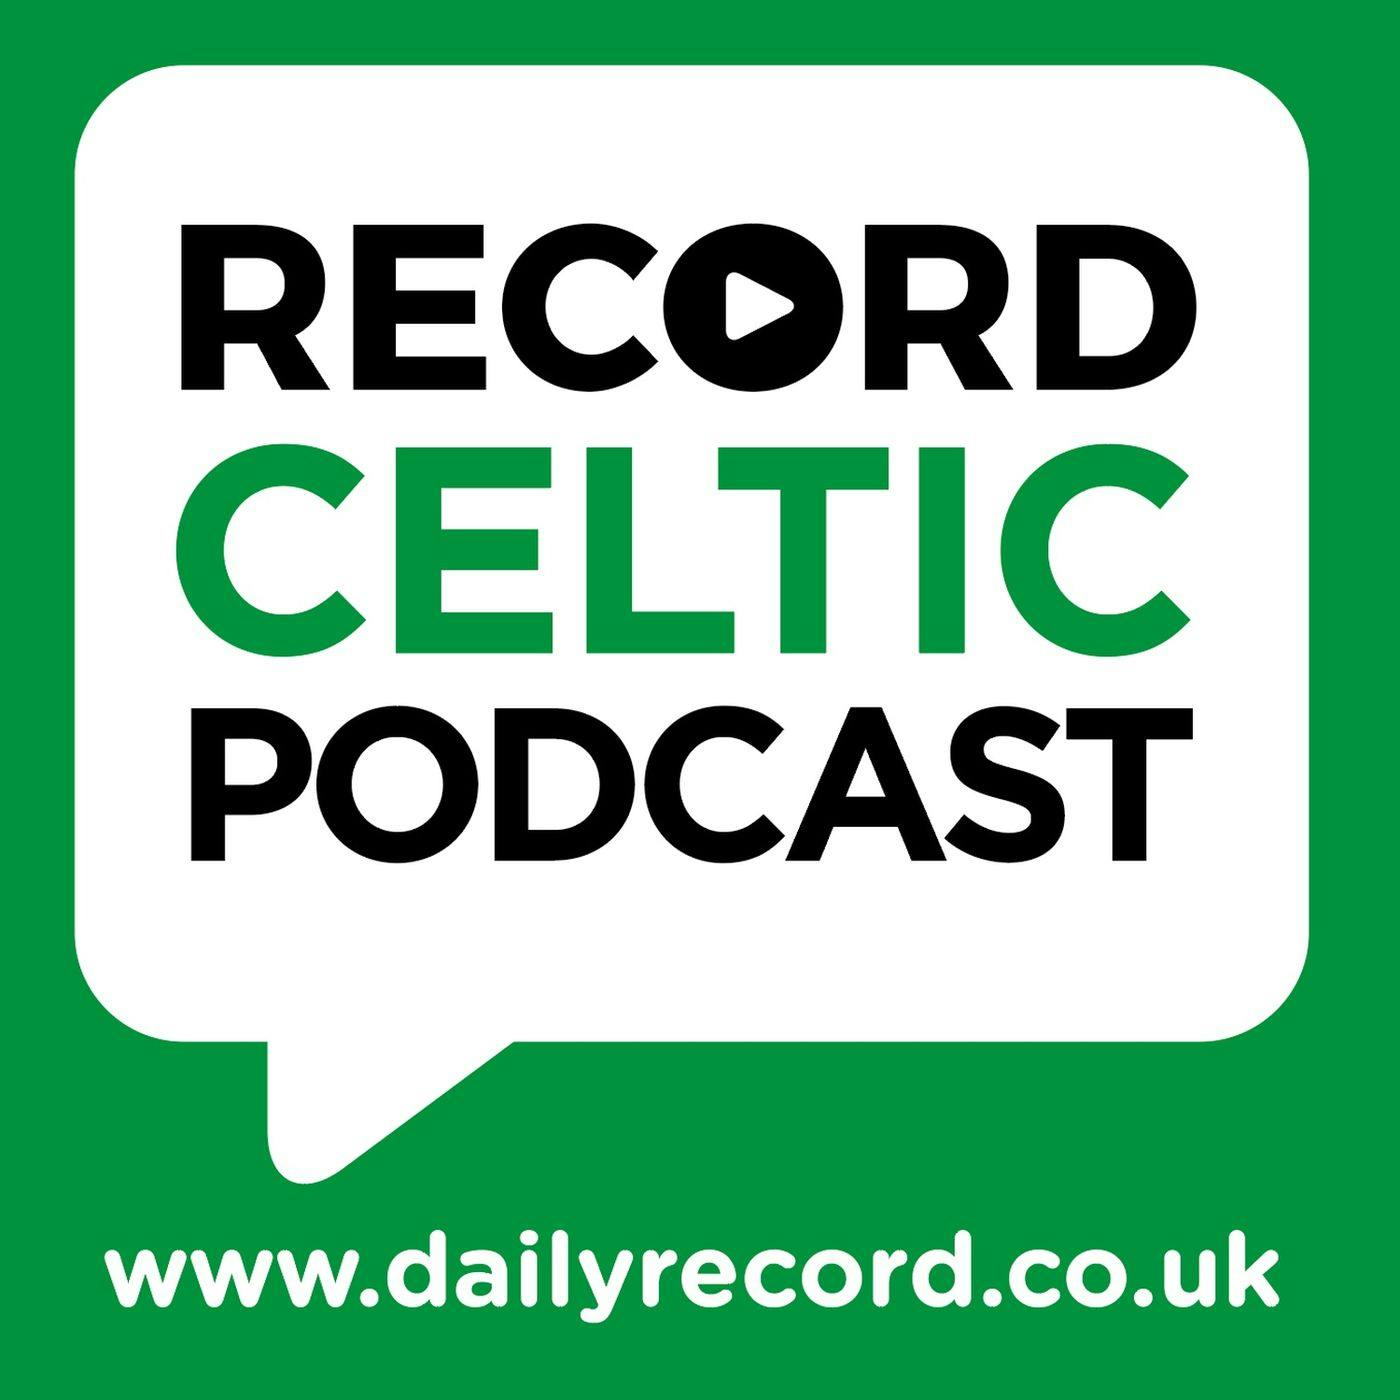 Celtic’s pre-season tour takeaways | Celtic squad depth and transfer analysis | Leigh Griffiths’ value